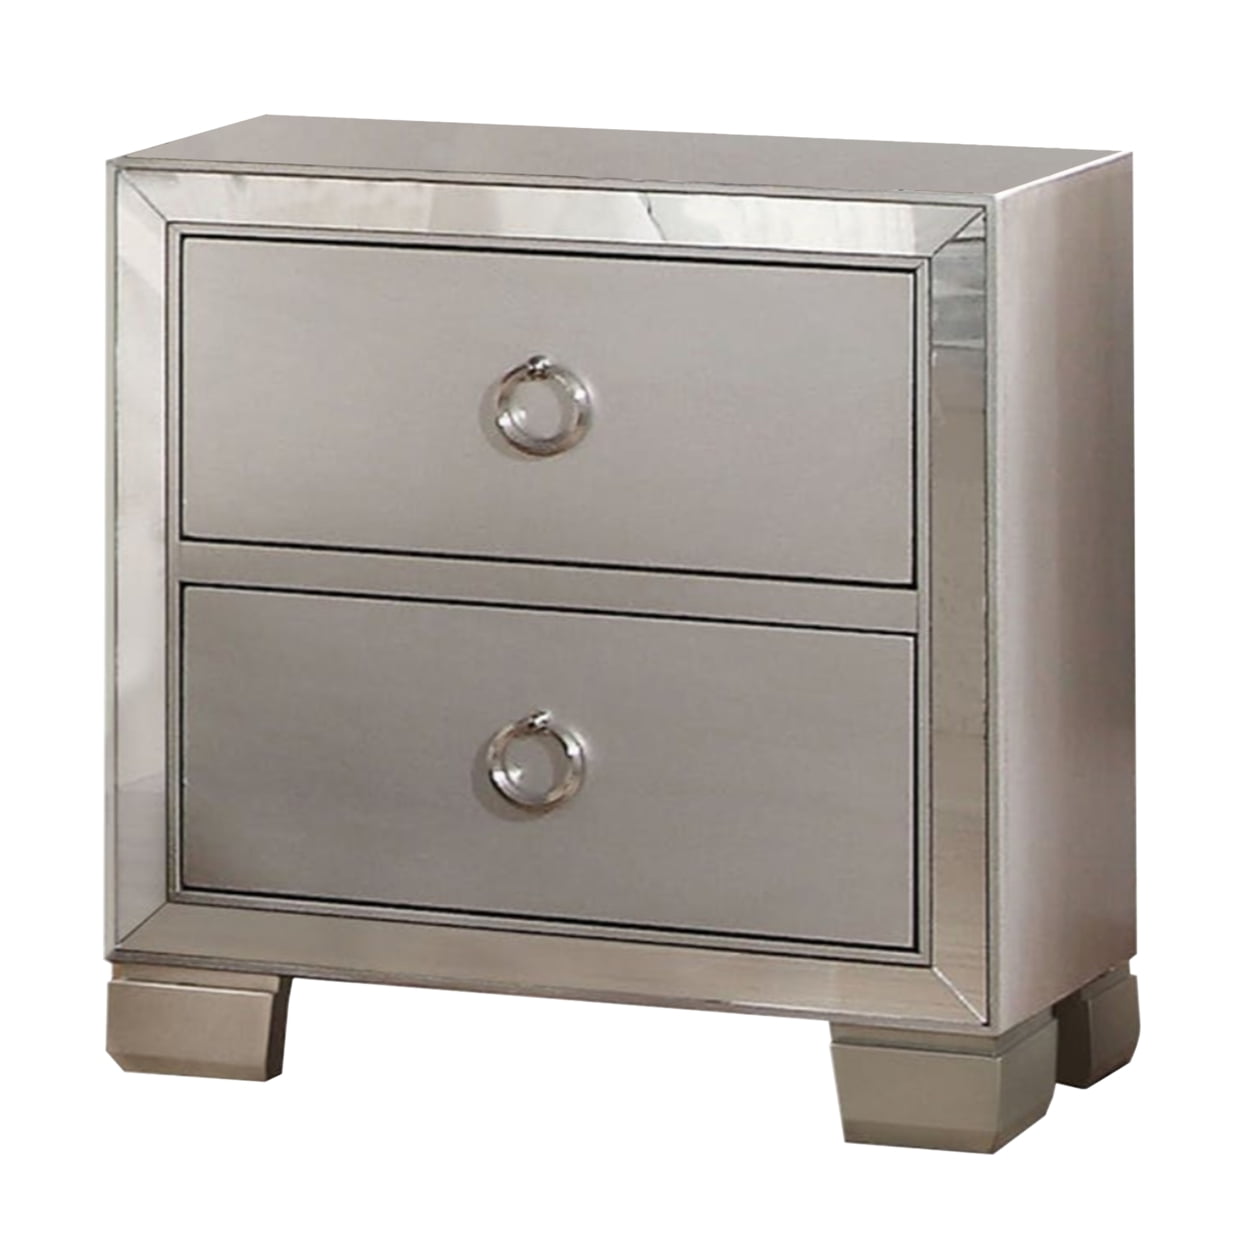 Picture of Acme Furniture 24843 22 x 15 x 23 in. Voeville II Nightstand, Platinum